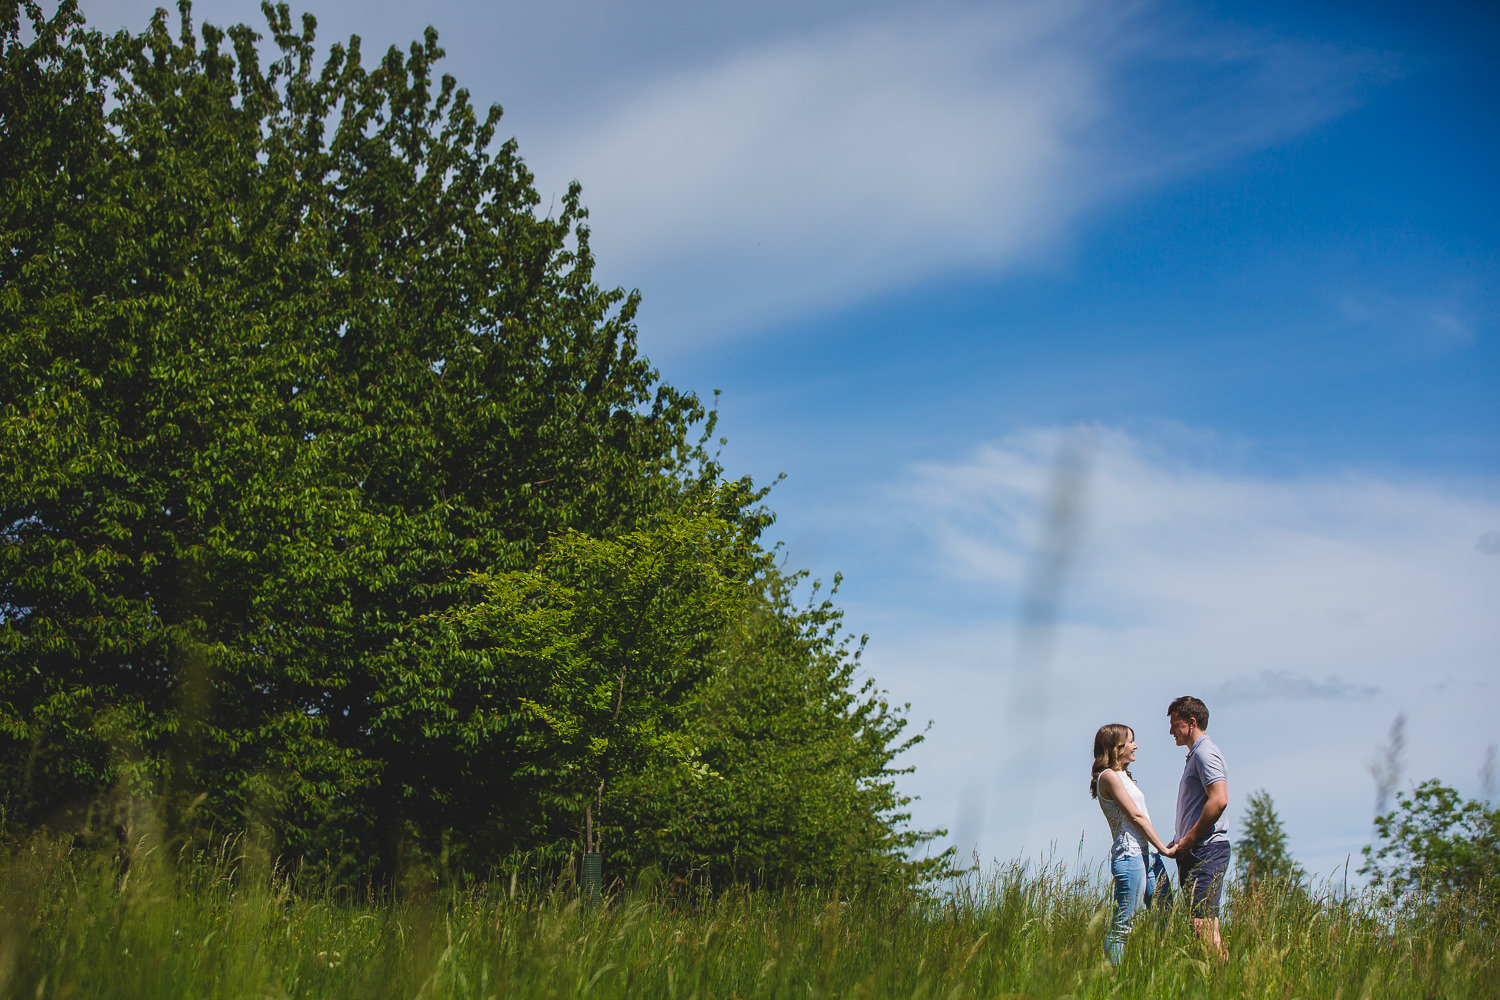 A lady and man in a field in Cambridge for their engagement shoot